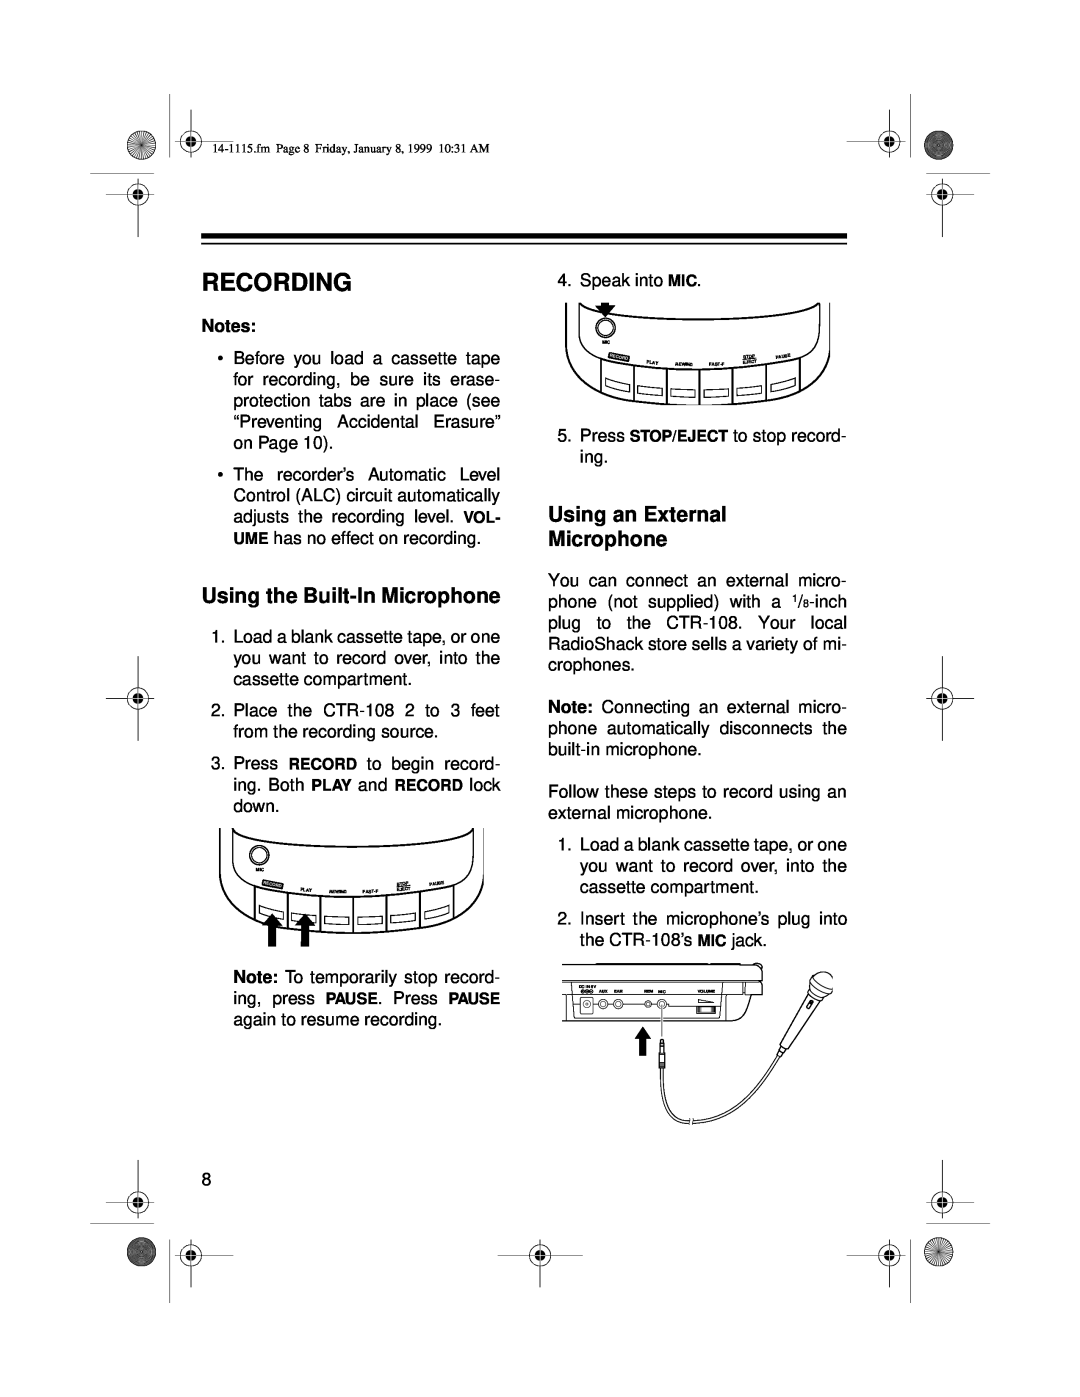 Optimus CTR-108 owner manual Recording, Using the Built-InMicrophone, Using an External Microphone 